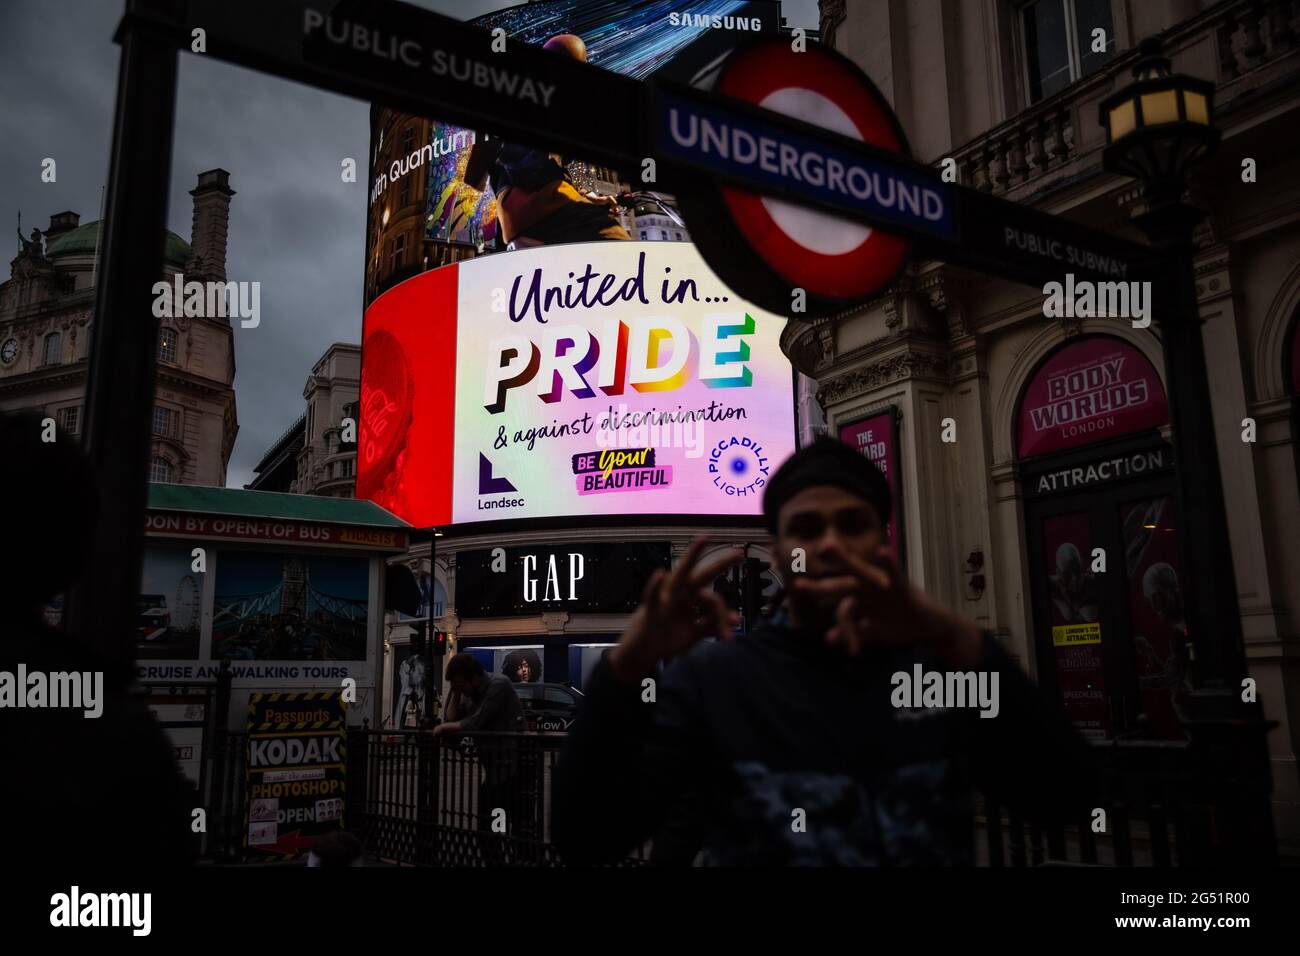 London, United Kingdom, June 24, 2021: People walk by Piccadilly Circus underground station in front of the Pride billboard  as the city celebrates th Stock Photo